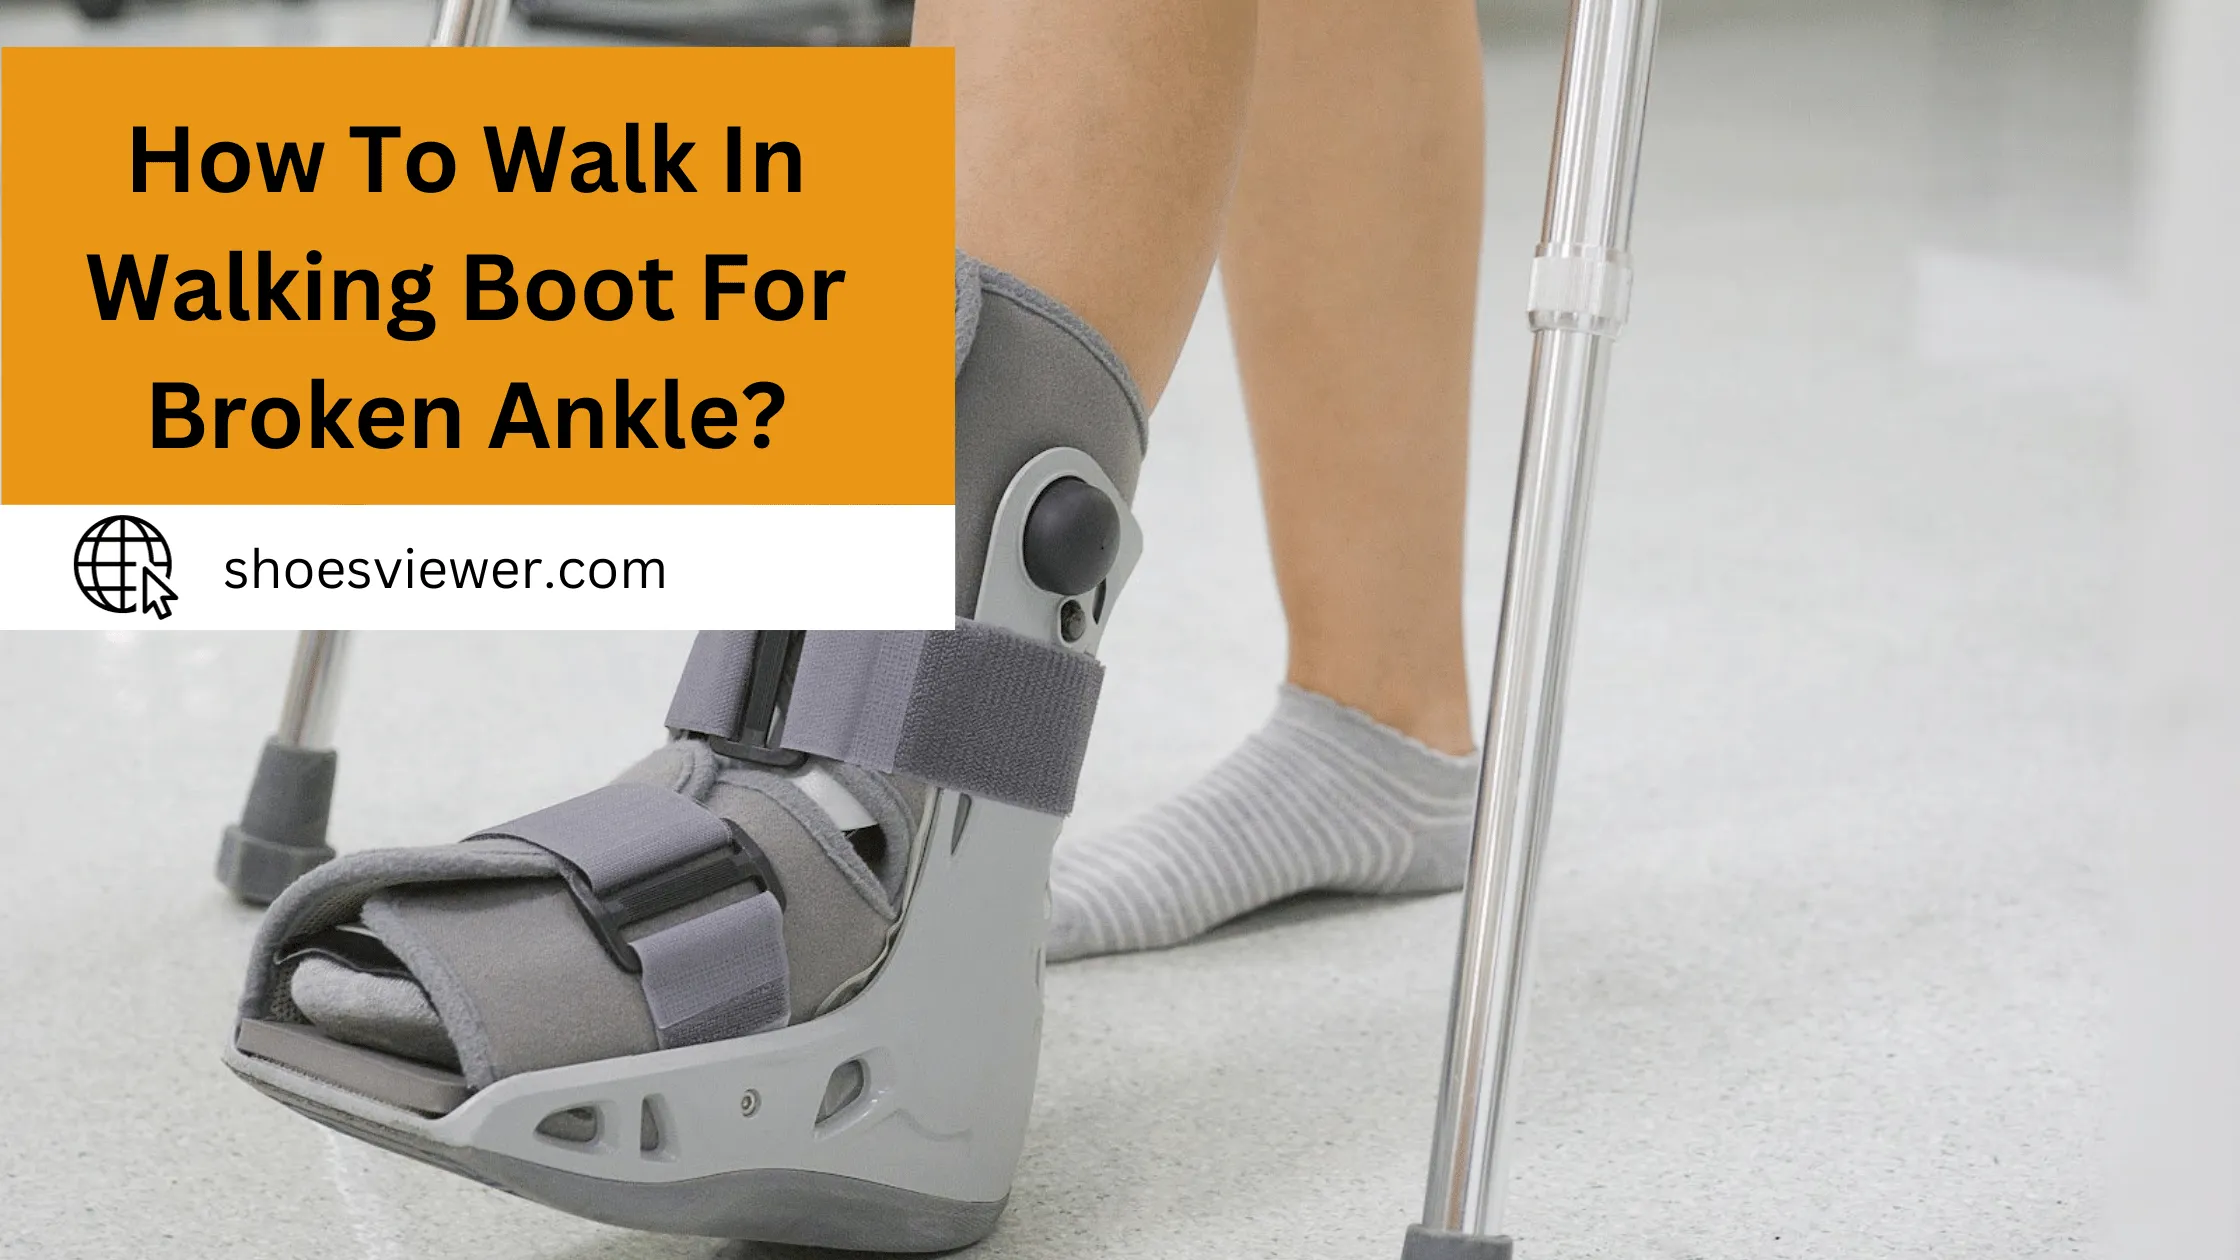 How To Walk In Walking Boot For Broken Ankle? Ultimate Guide